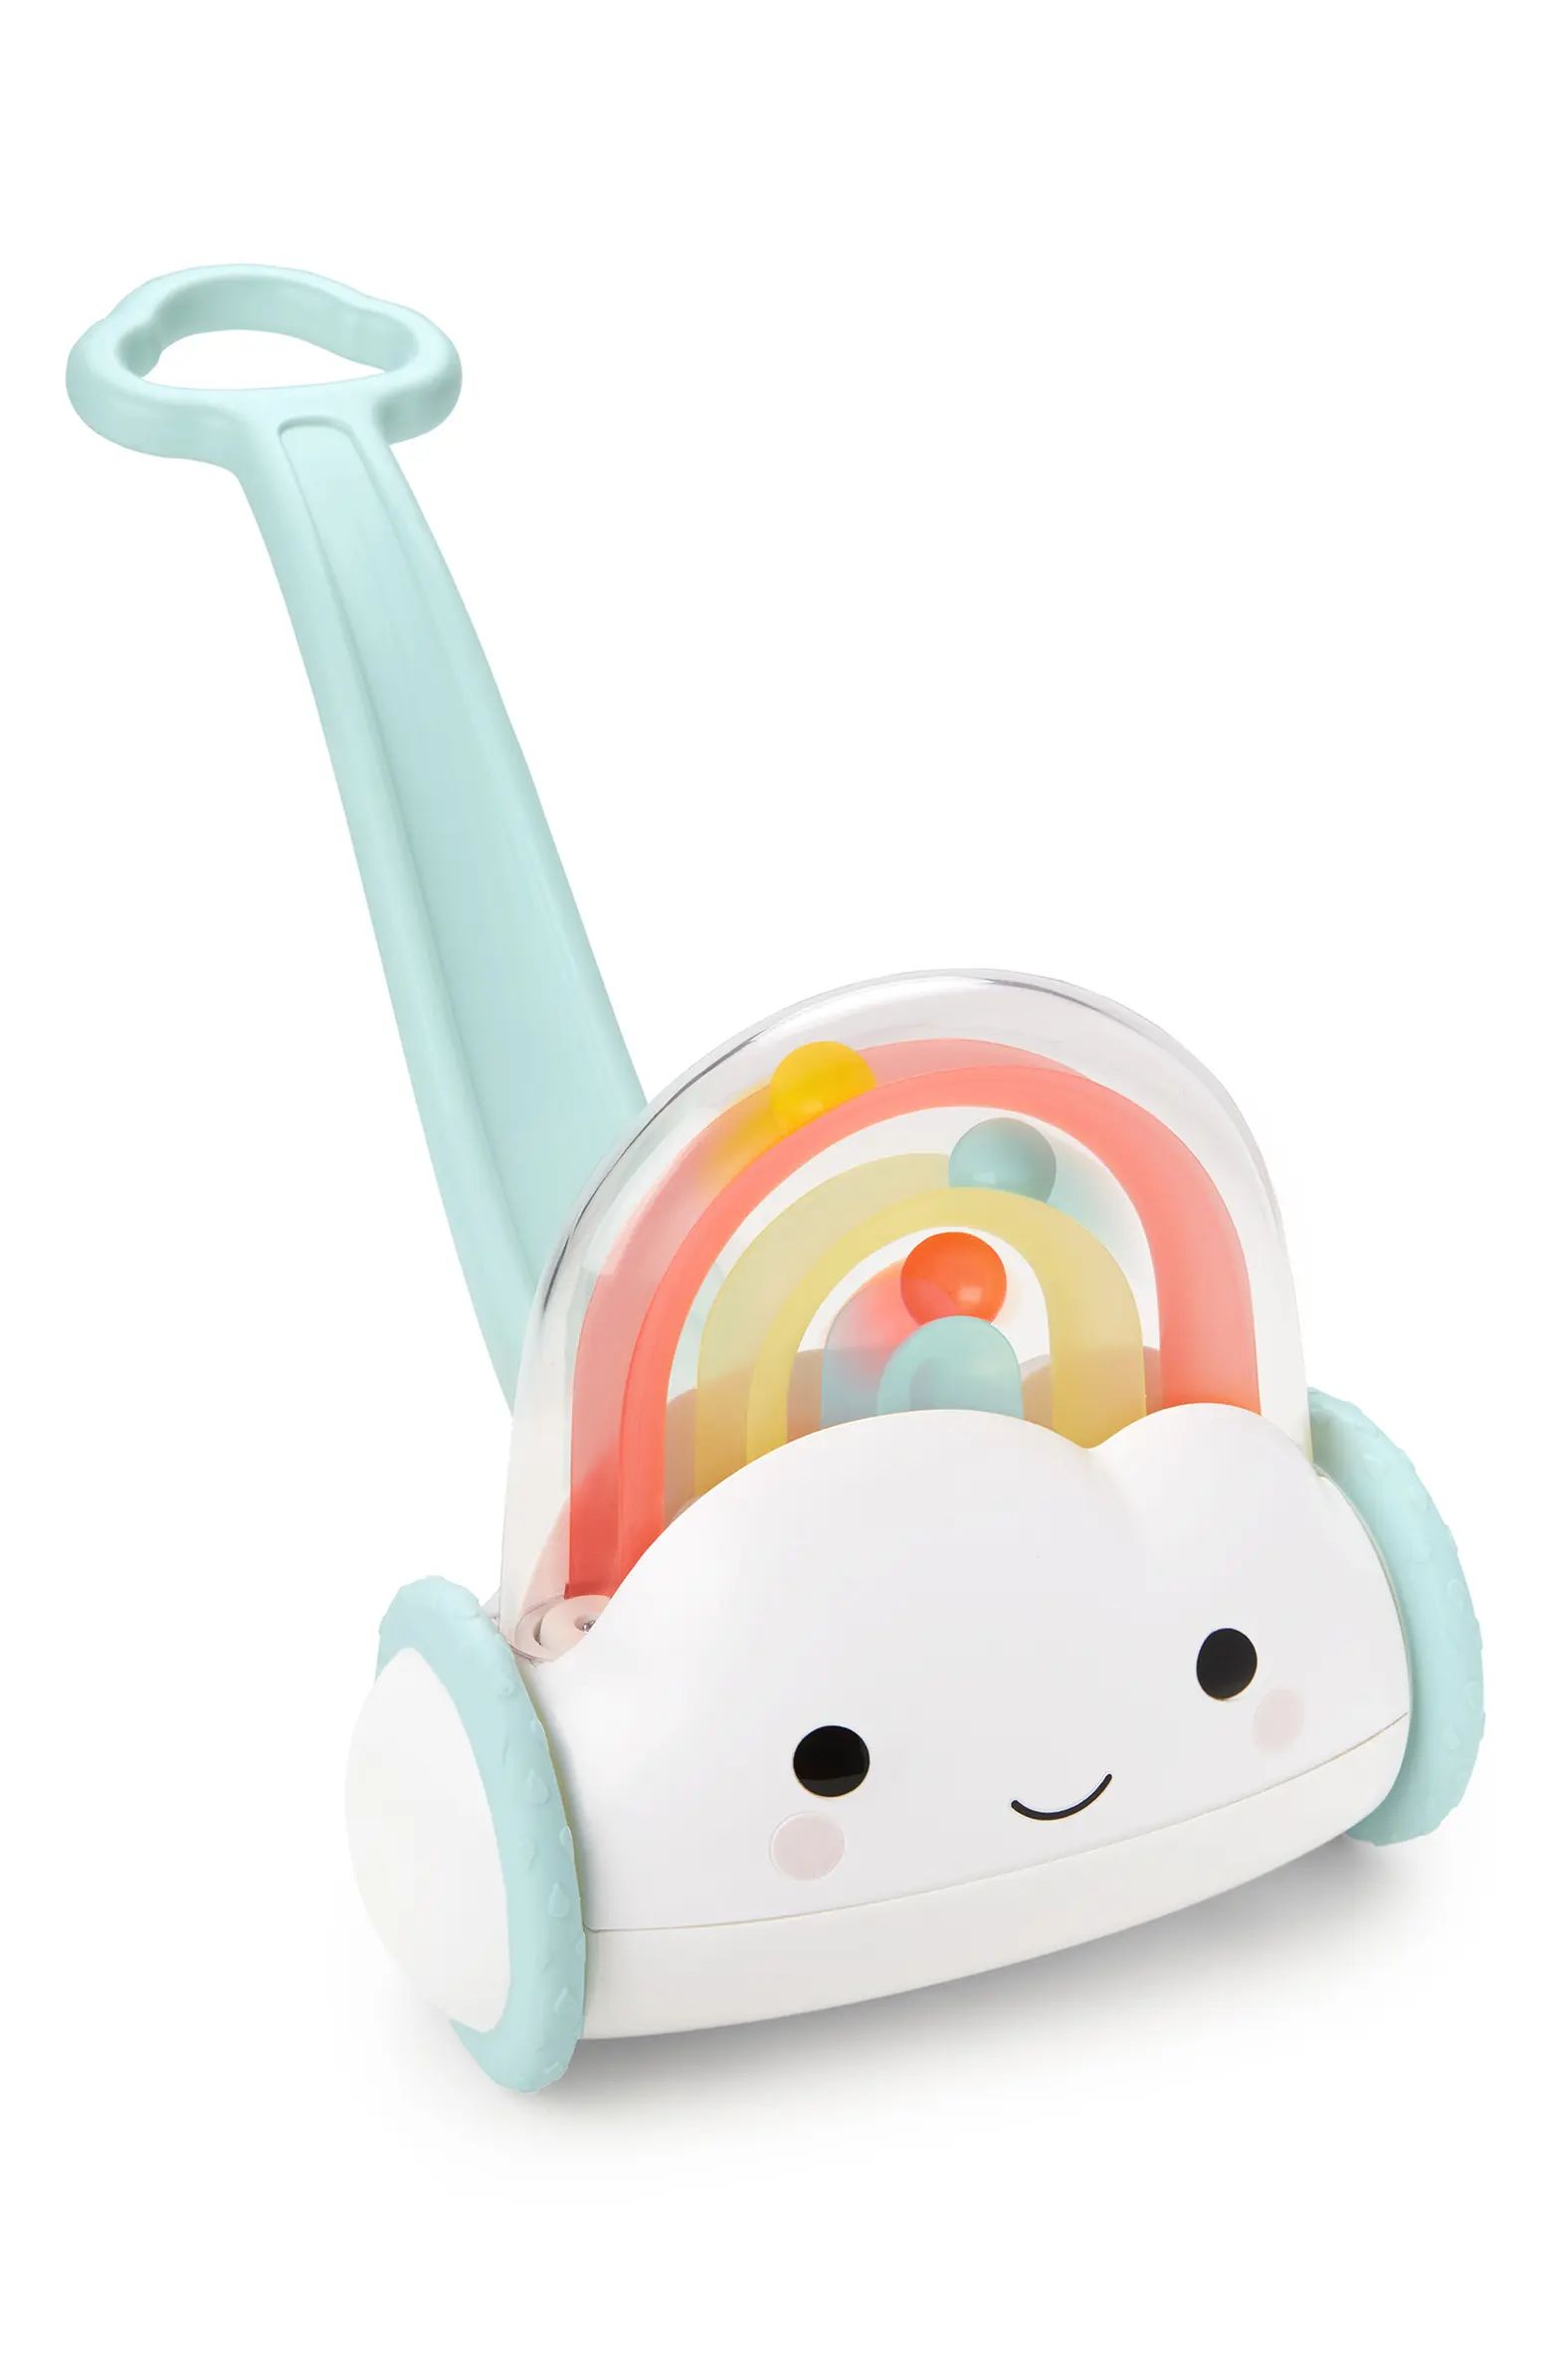 Skip Hop Silver LIning Cloud Rainbow Push Toy | Nordstrom | Nordstrom